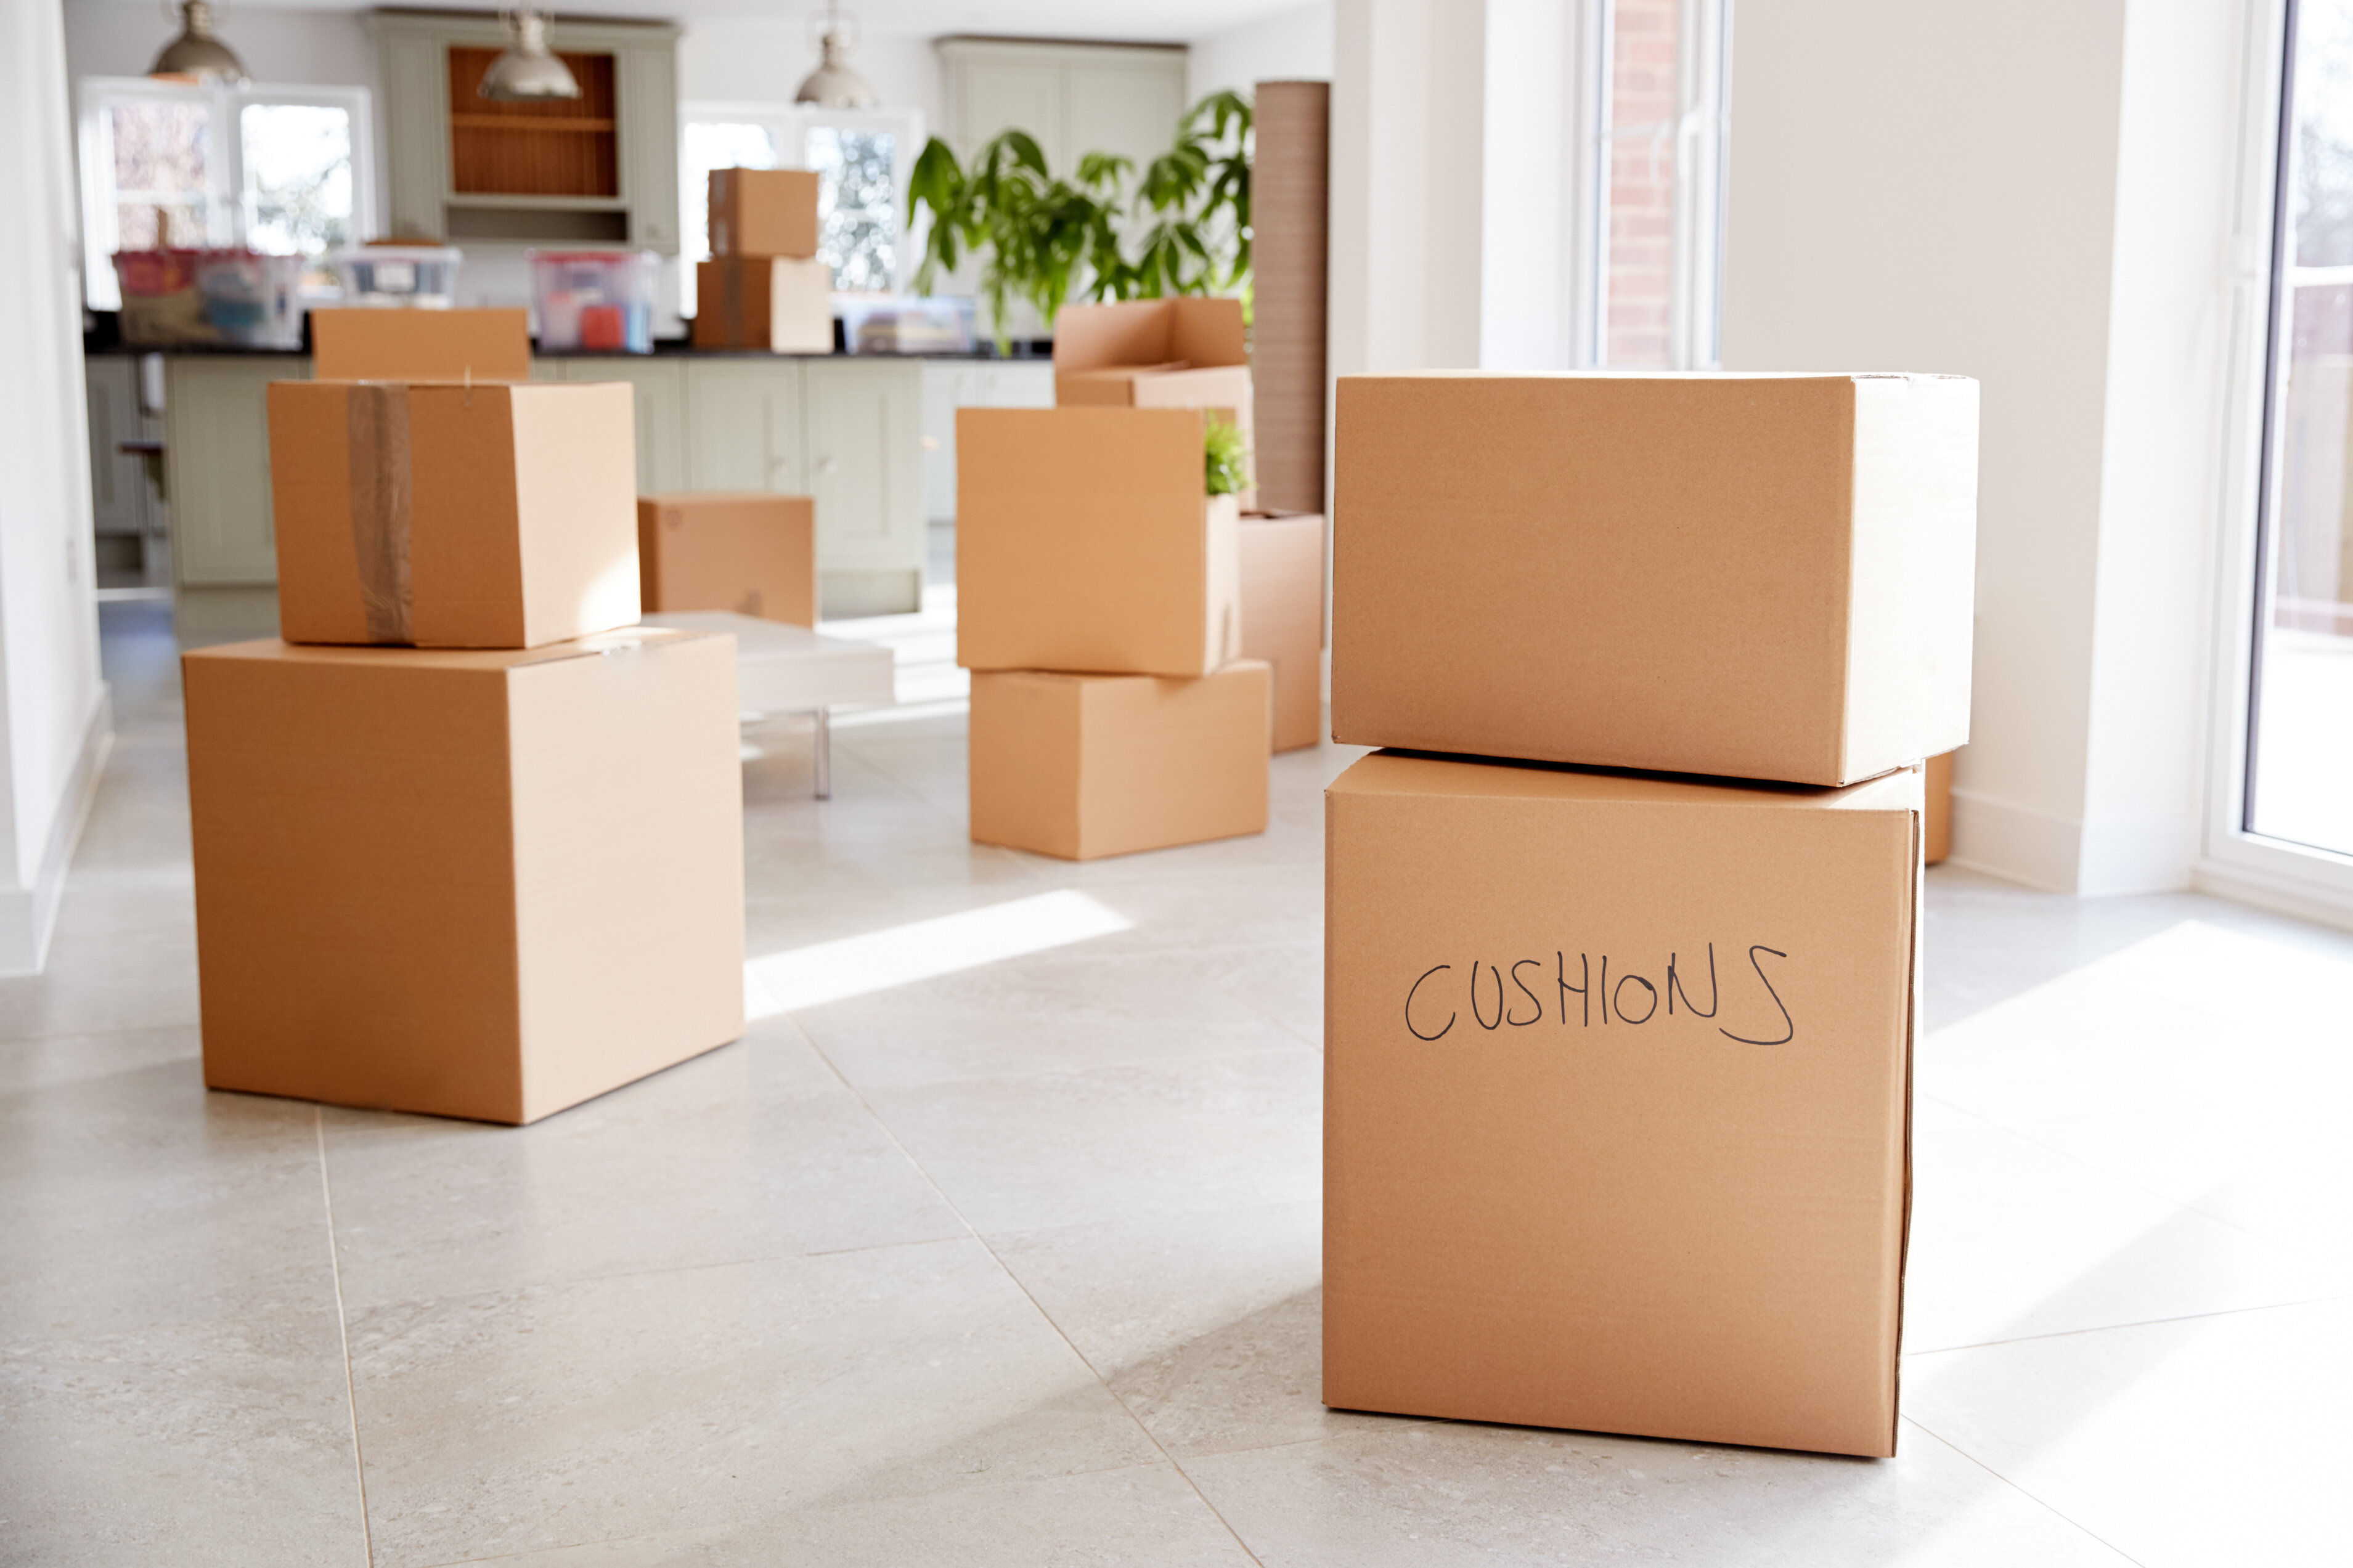 Cardboard moving boxes in a bright, white kitchen area of a home. 